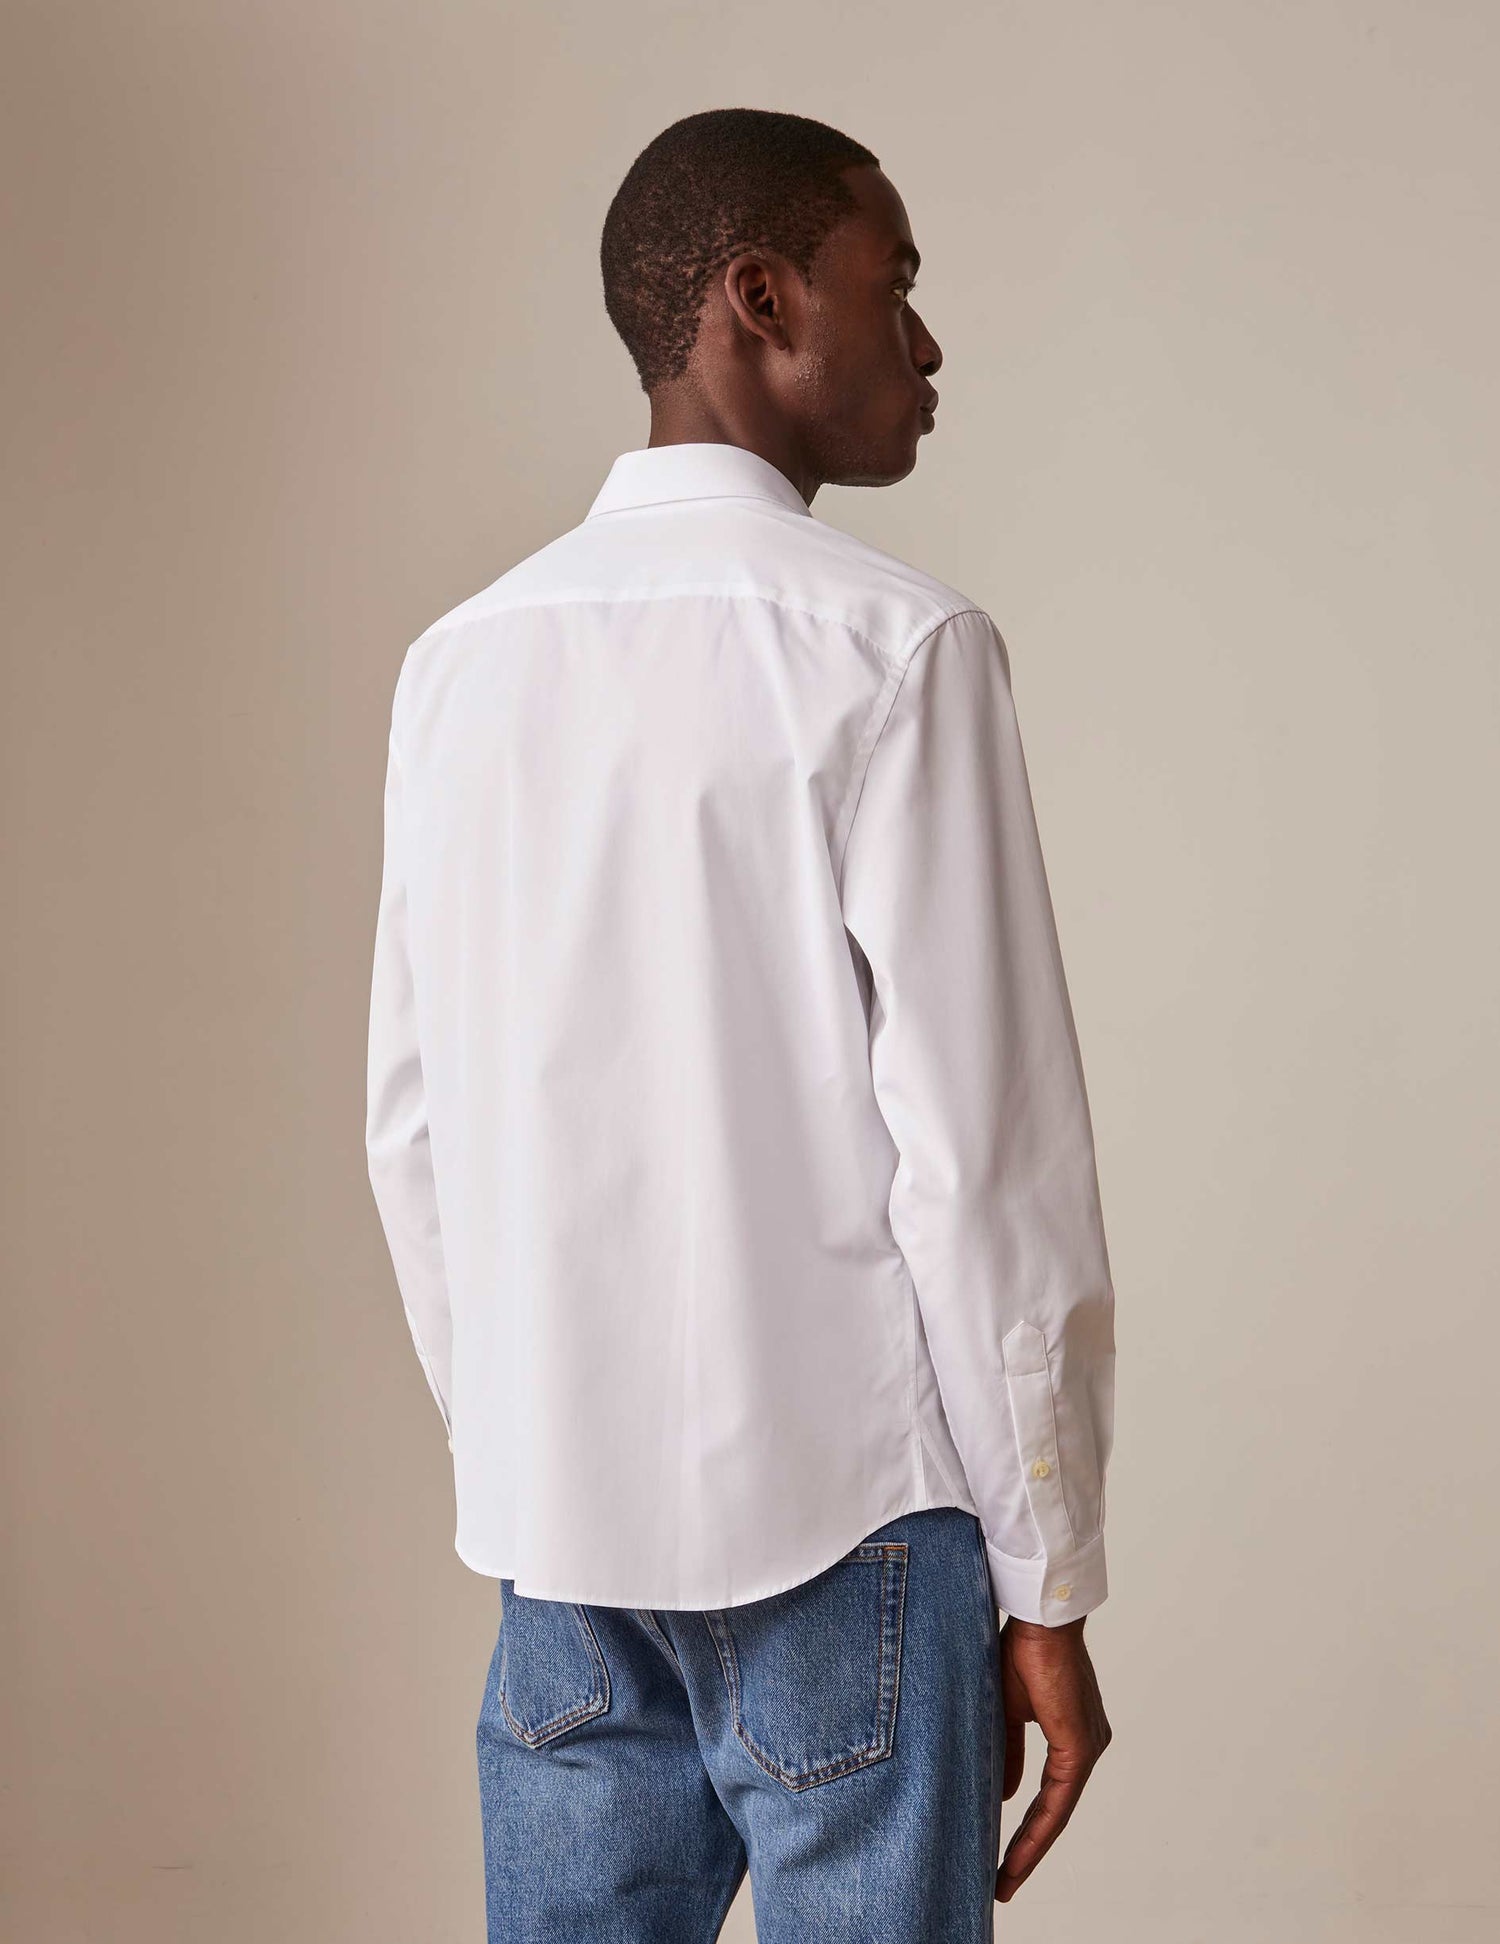 White "Je t'aime" shirt with red embroidery - Poplin - Figaret Collar#4